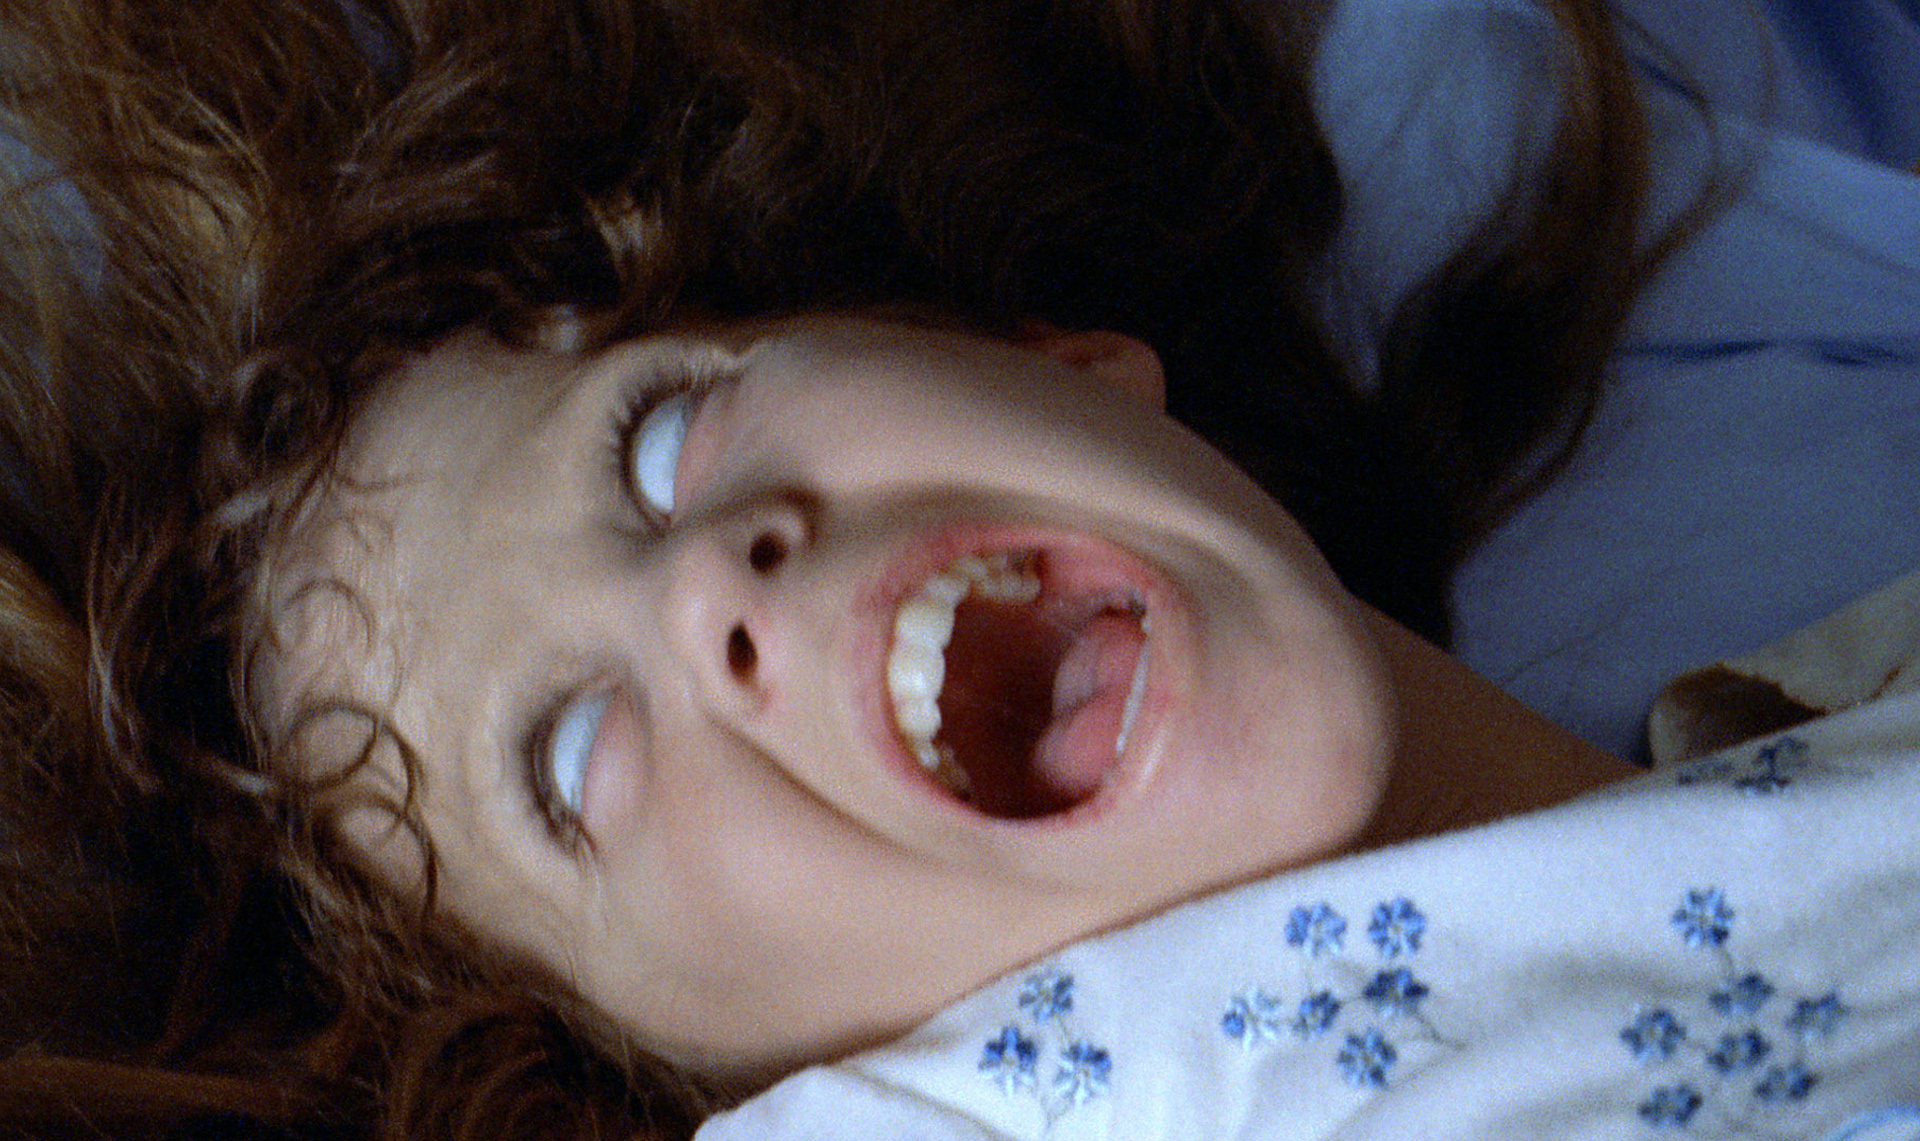 Mike Flanagan Takes On 'The Exorcist' For Blumhouse And Morgan Creek